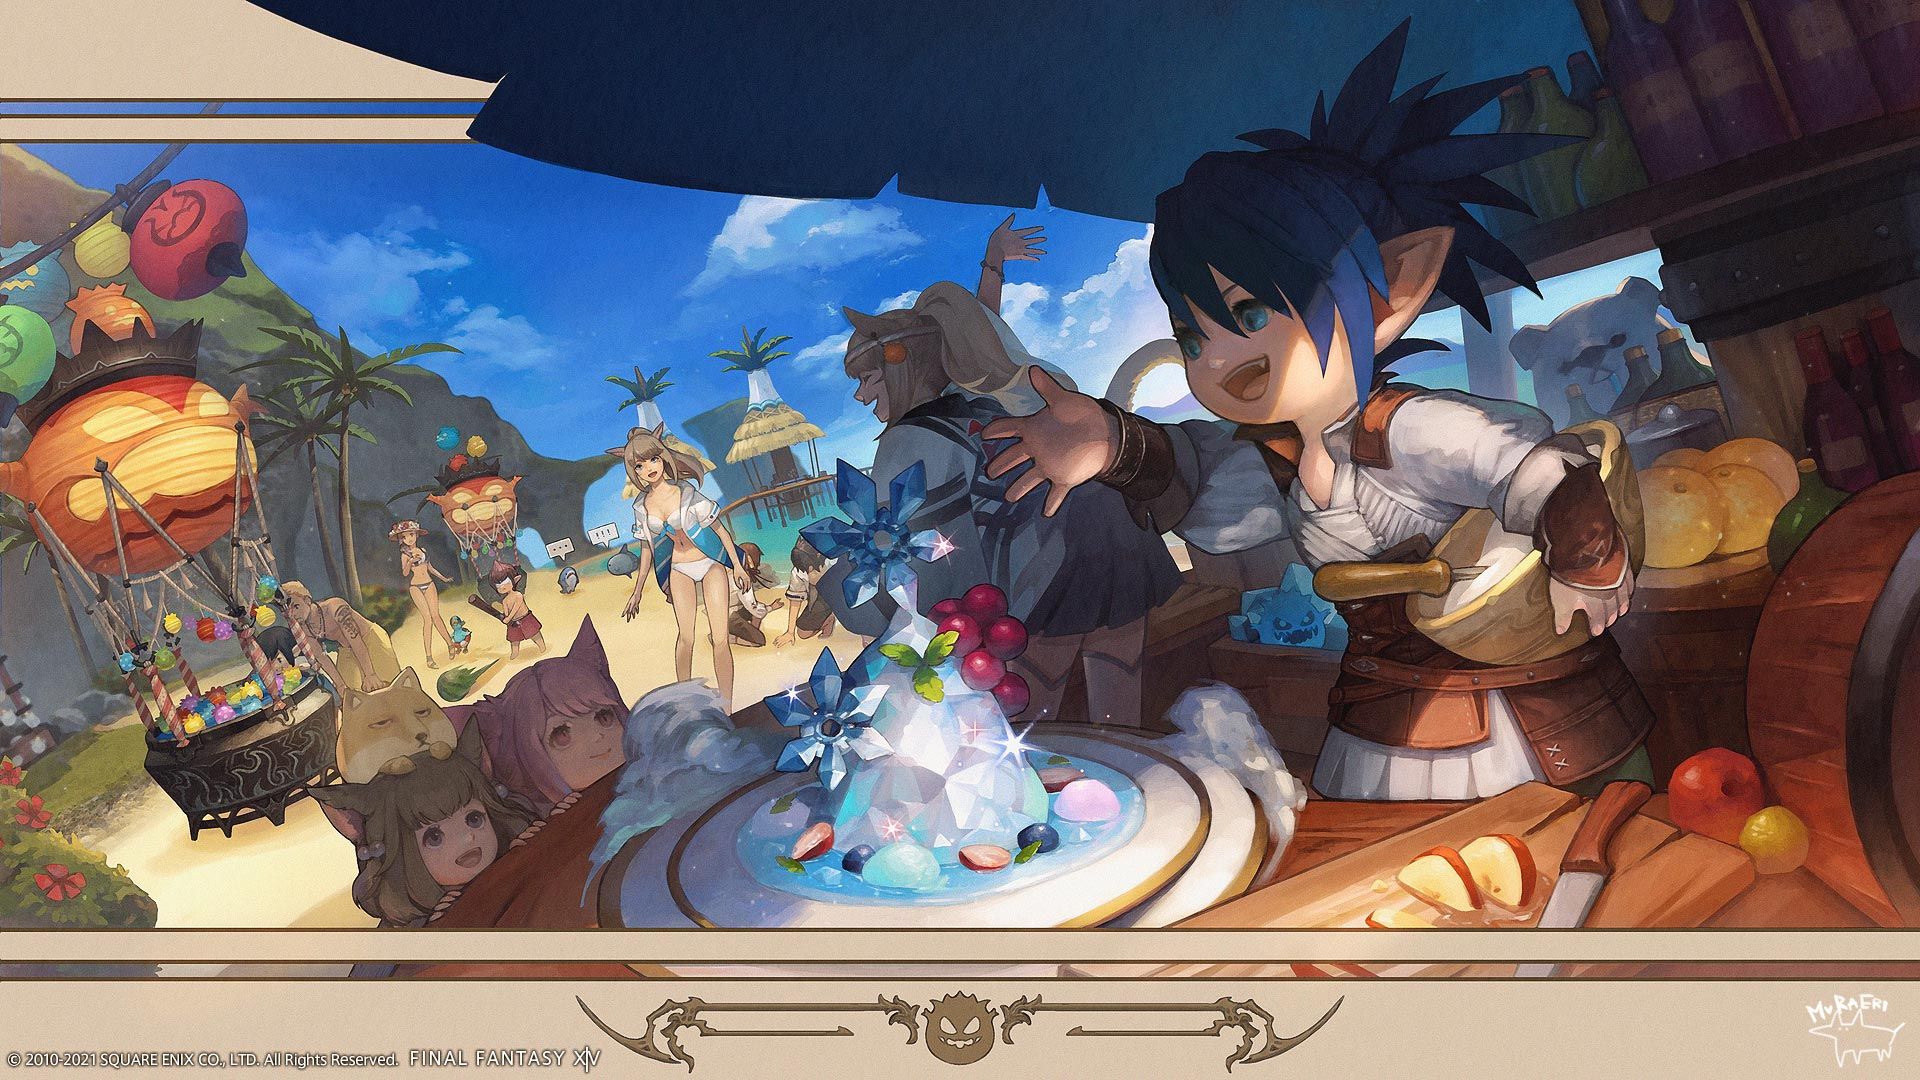 Final Fantasy XIV Moonfire Faire Coming to Celebrate the Summer